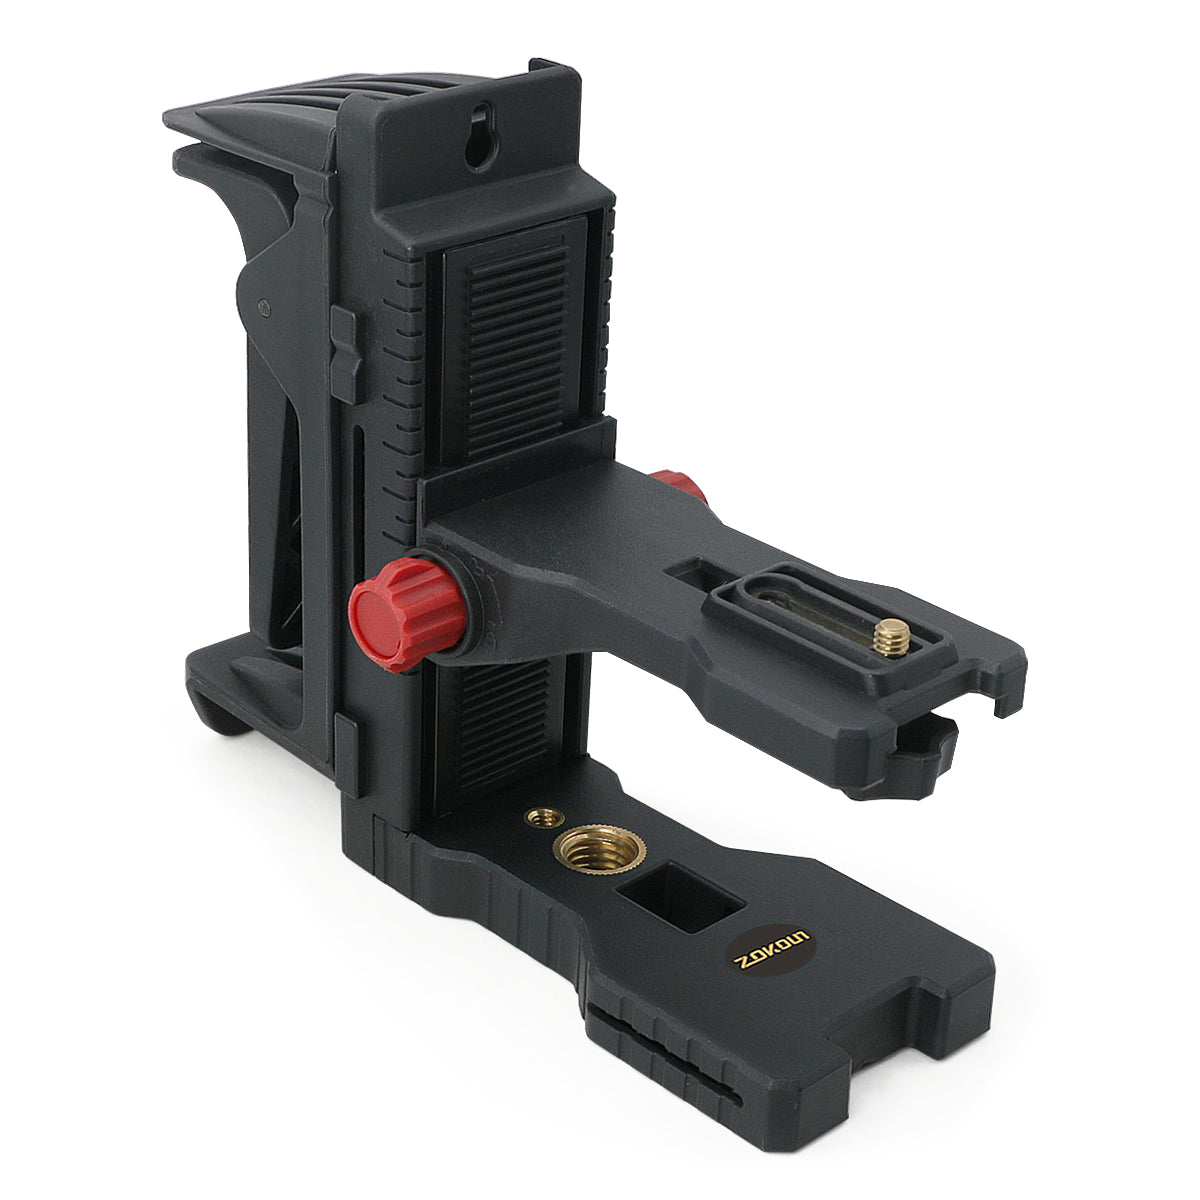 Zokoun Multifunctional Magnetic Bracket with Spring Clip Laser Level-Alternative to A Standard 1/4